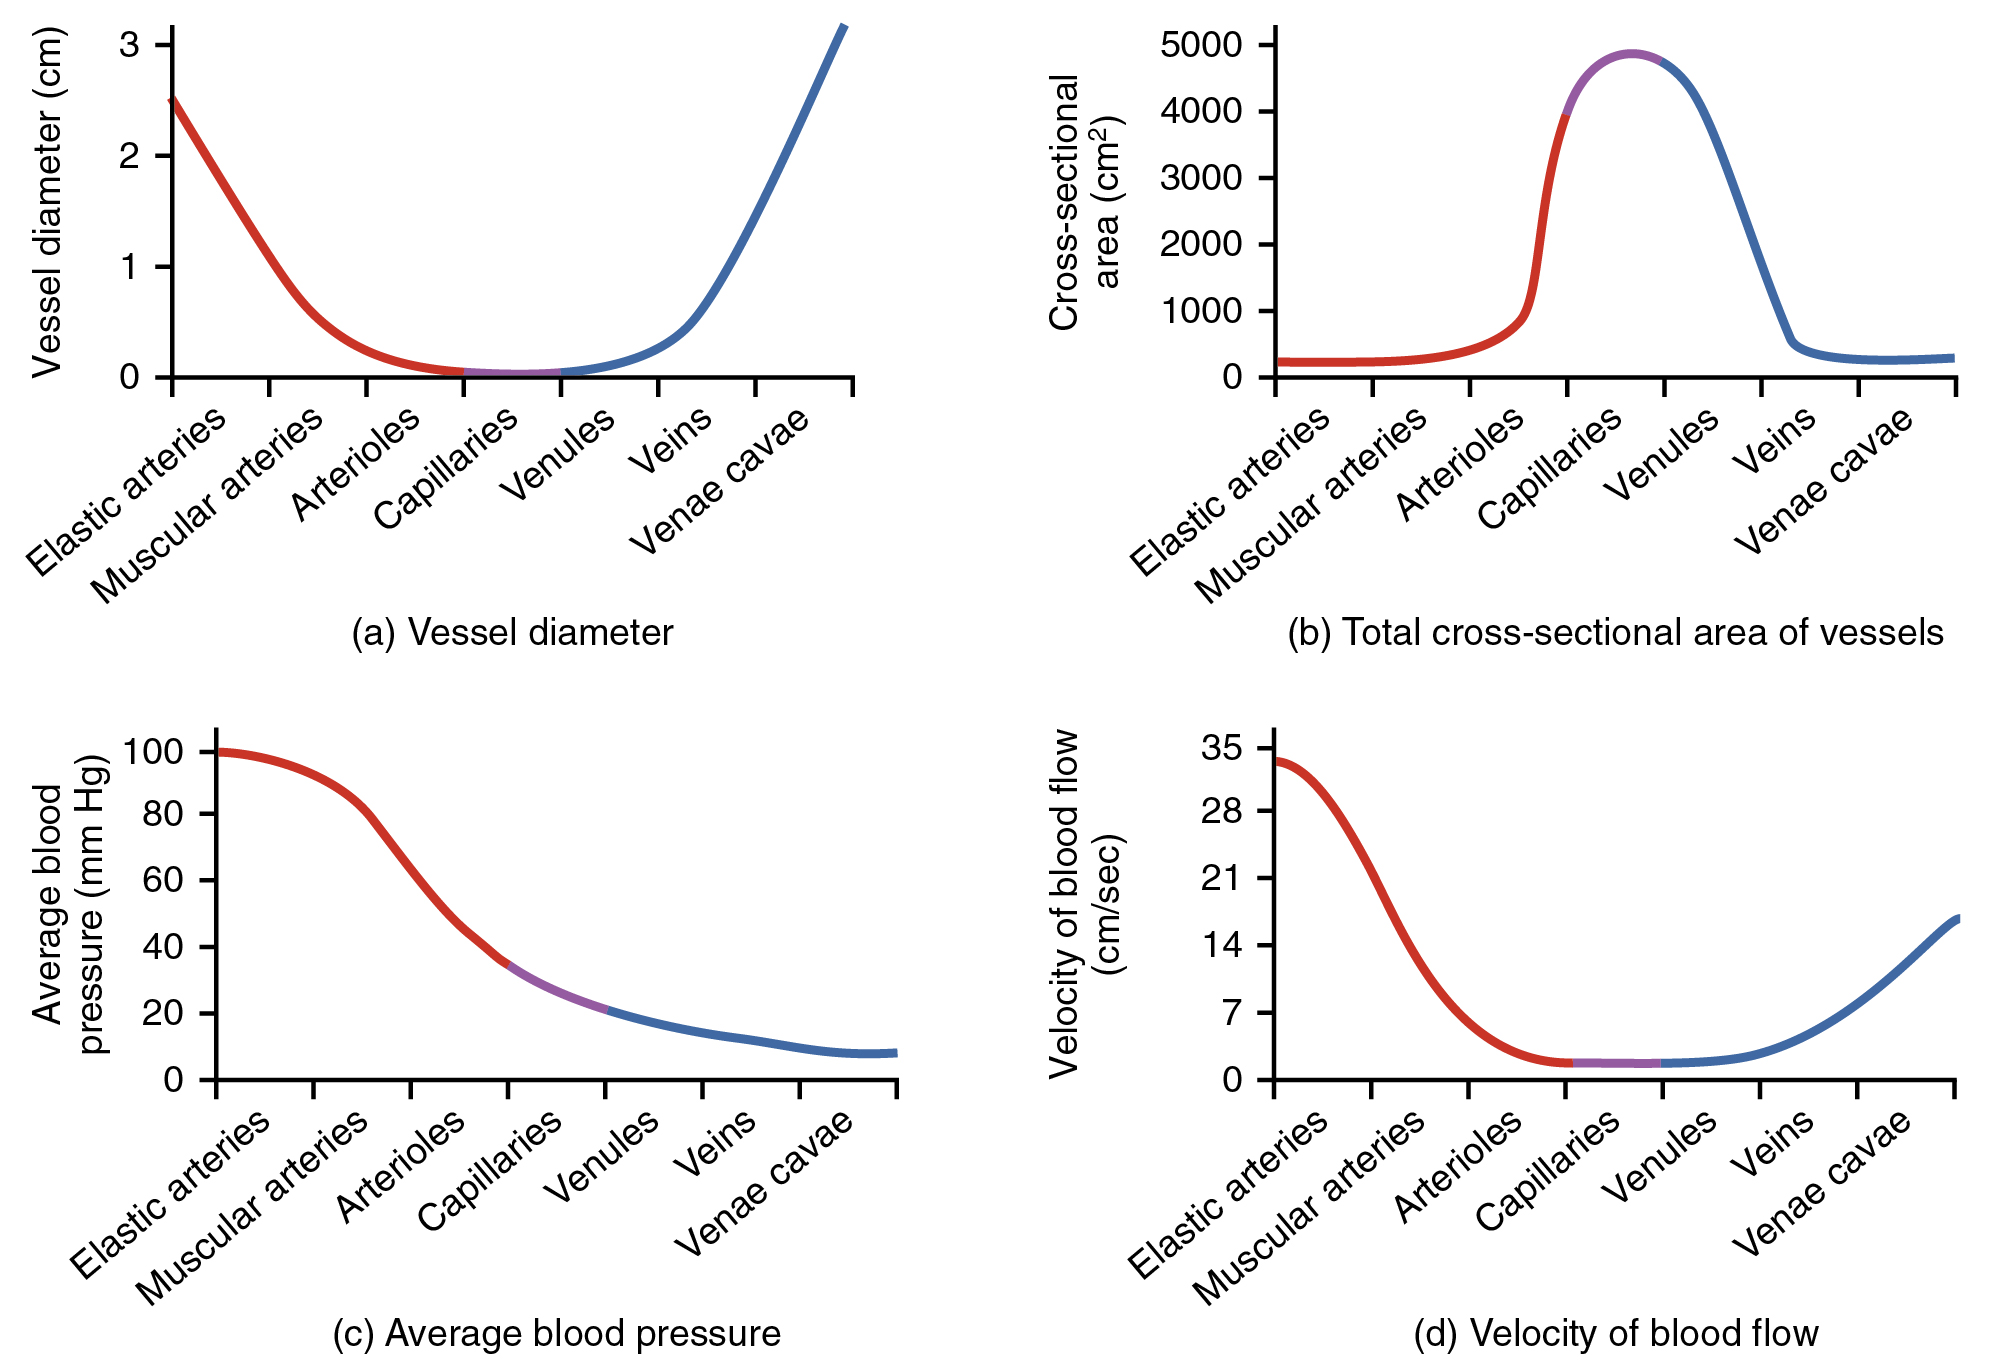 This figure shows four graphs. The top left graph shows the vessel diameter for different types of blood vessels. The top right panel shows cross-sectional area for different blood vessels. The bottom left panel shows the average blood pressure for different blood vessels, and the bottom right panel shows the velocity of blood flow in different blood vessels.